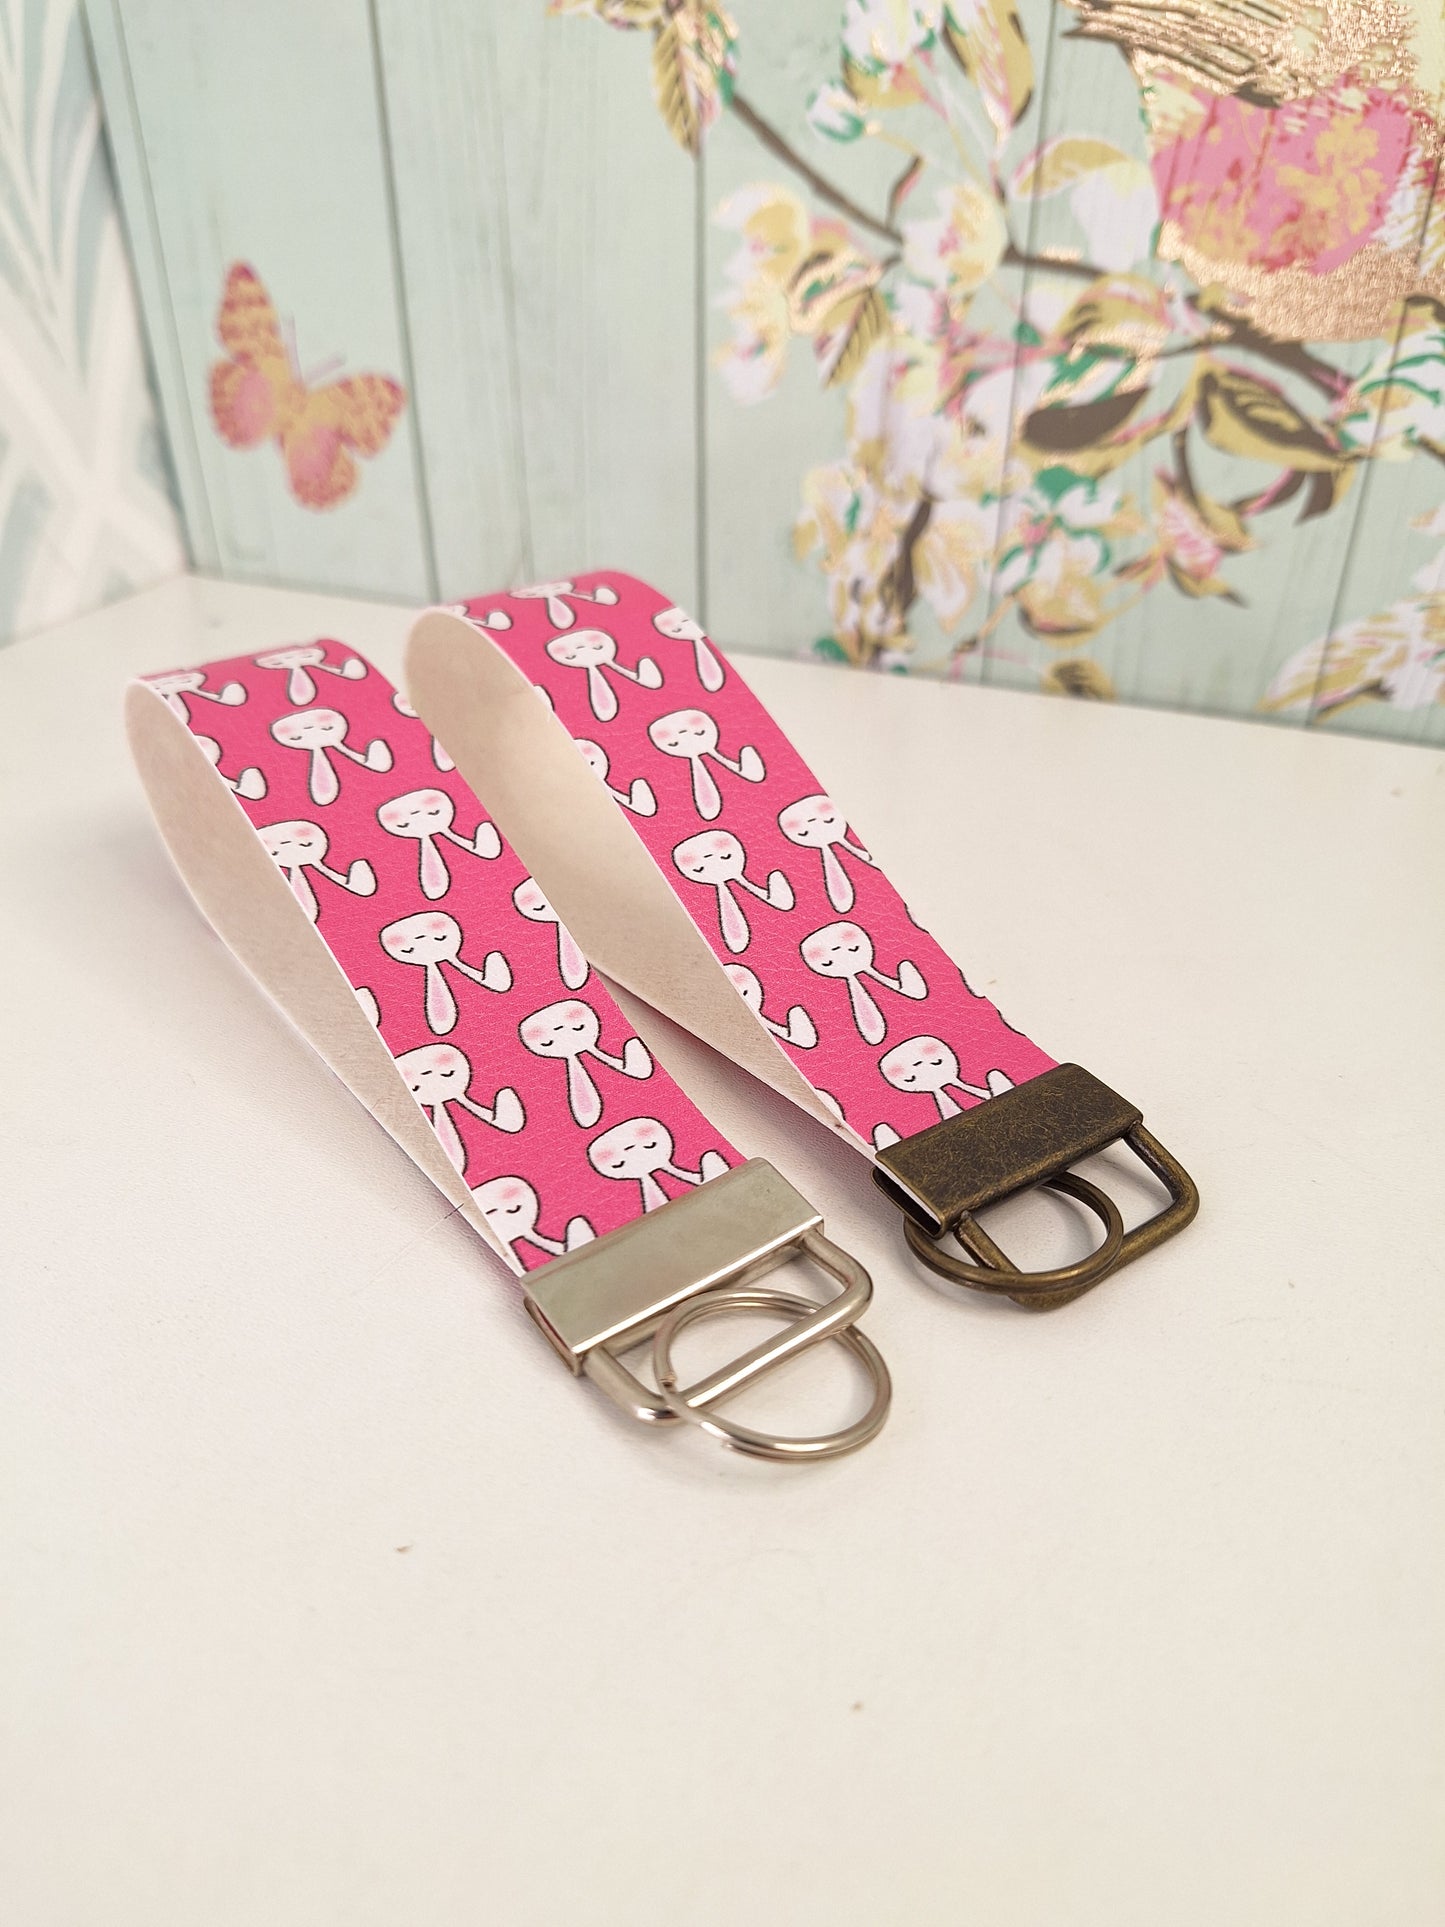 Rabbit Themed Faux leather key fob wristlet, Pink Letterbox Gift, Animal Lover Simple Small Presents for Her, Cute Animal Themed Gifts